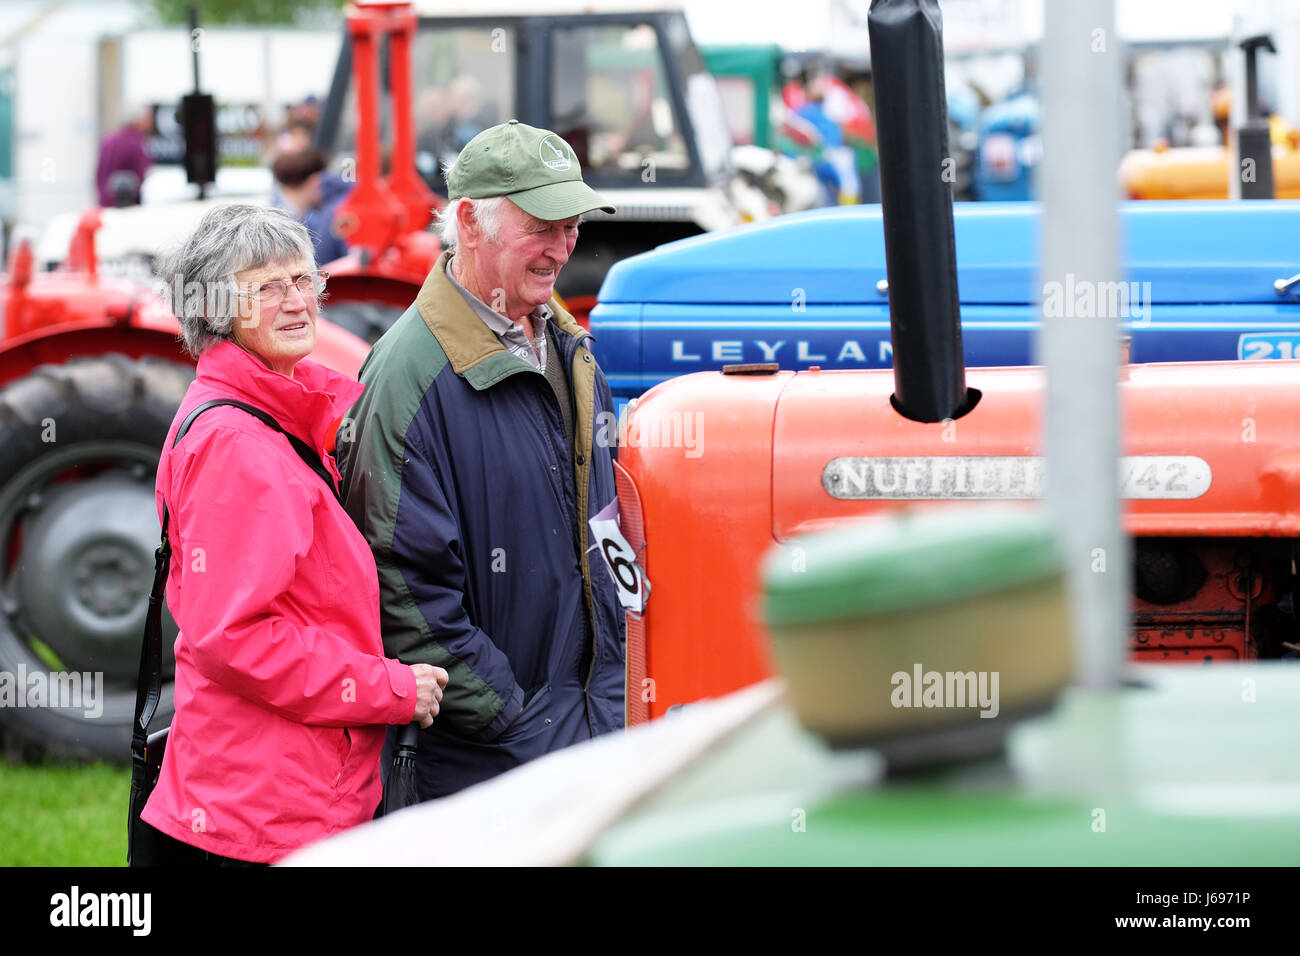 Royal Welsh Spring Festival, Builth Wells, Powys, Wales - May 2017 - Visitors to the show enjoy a walk among the vintage farm tractors at the Royal Welsh Spring Festival. Photo Steven May / Alamy Live News Stock Photo